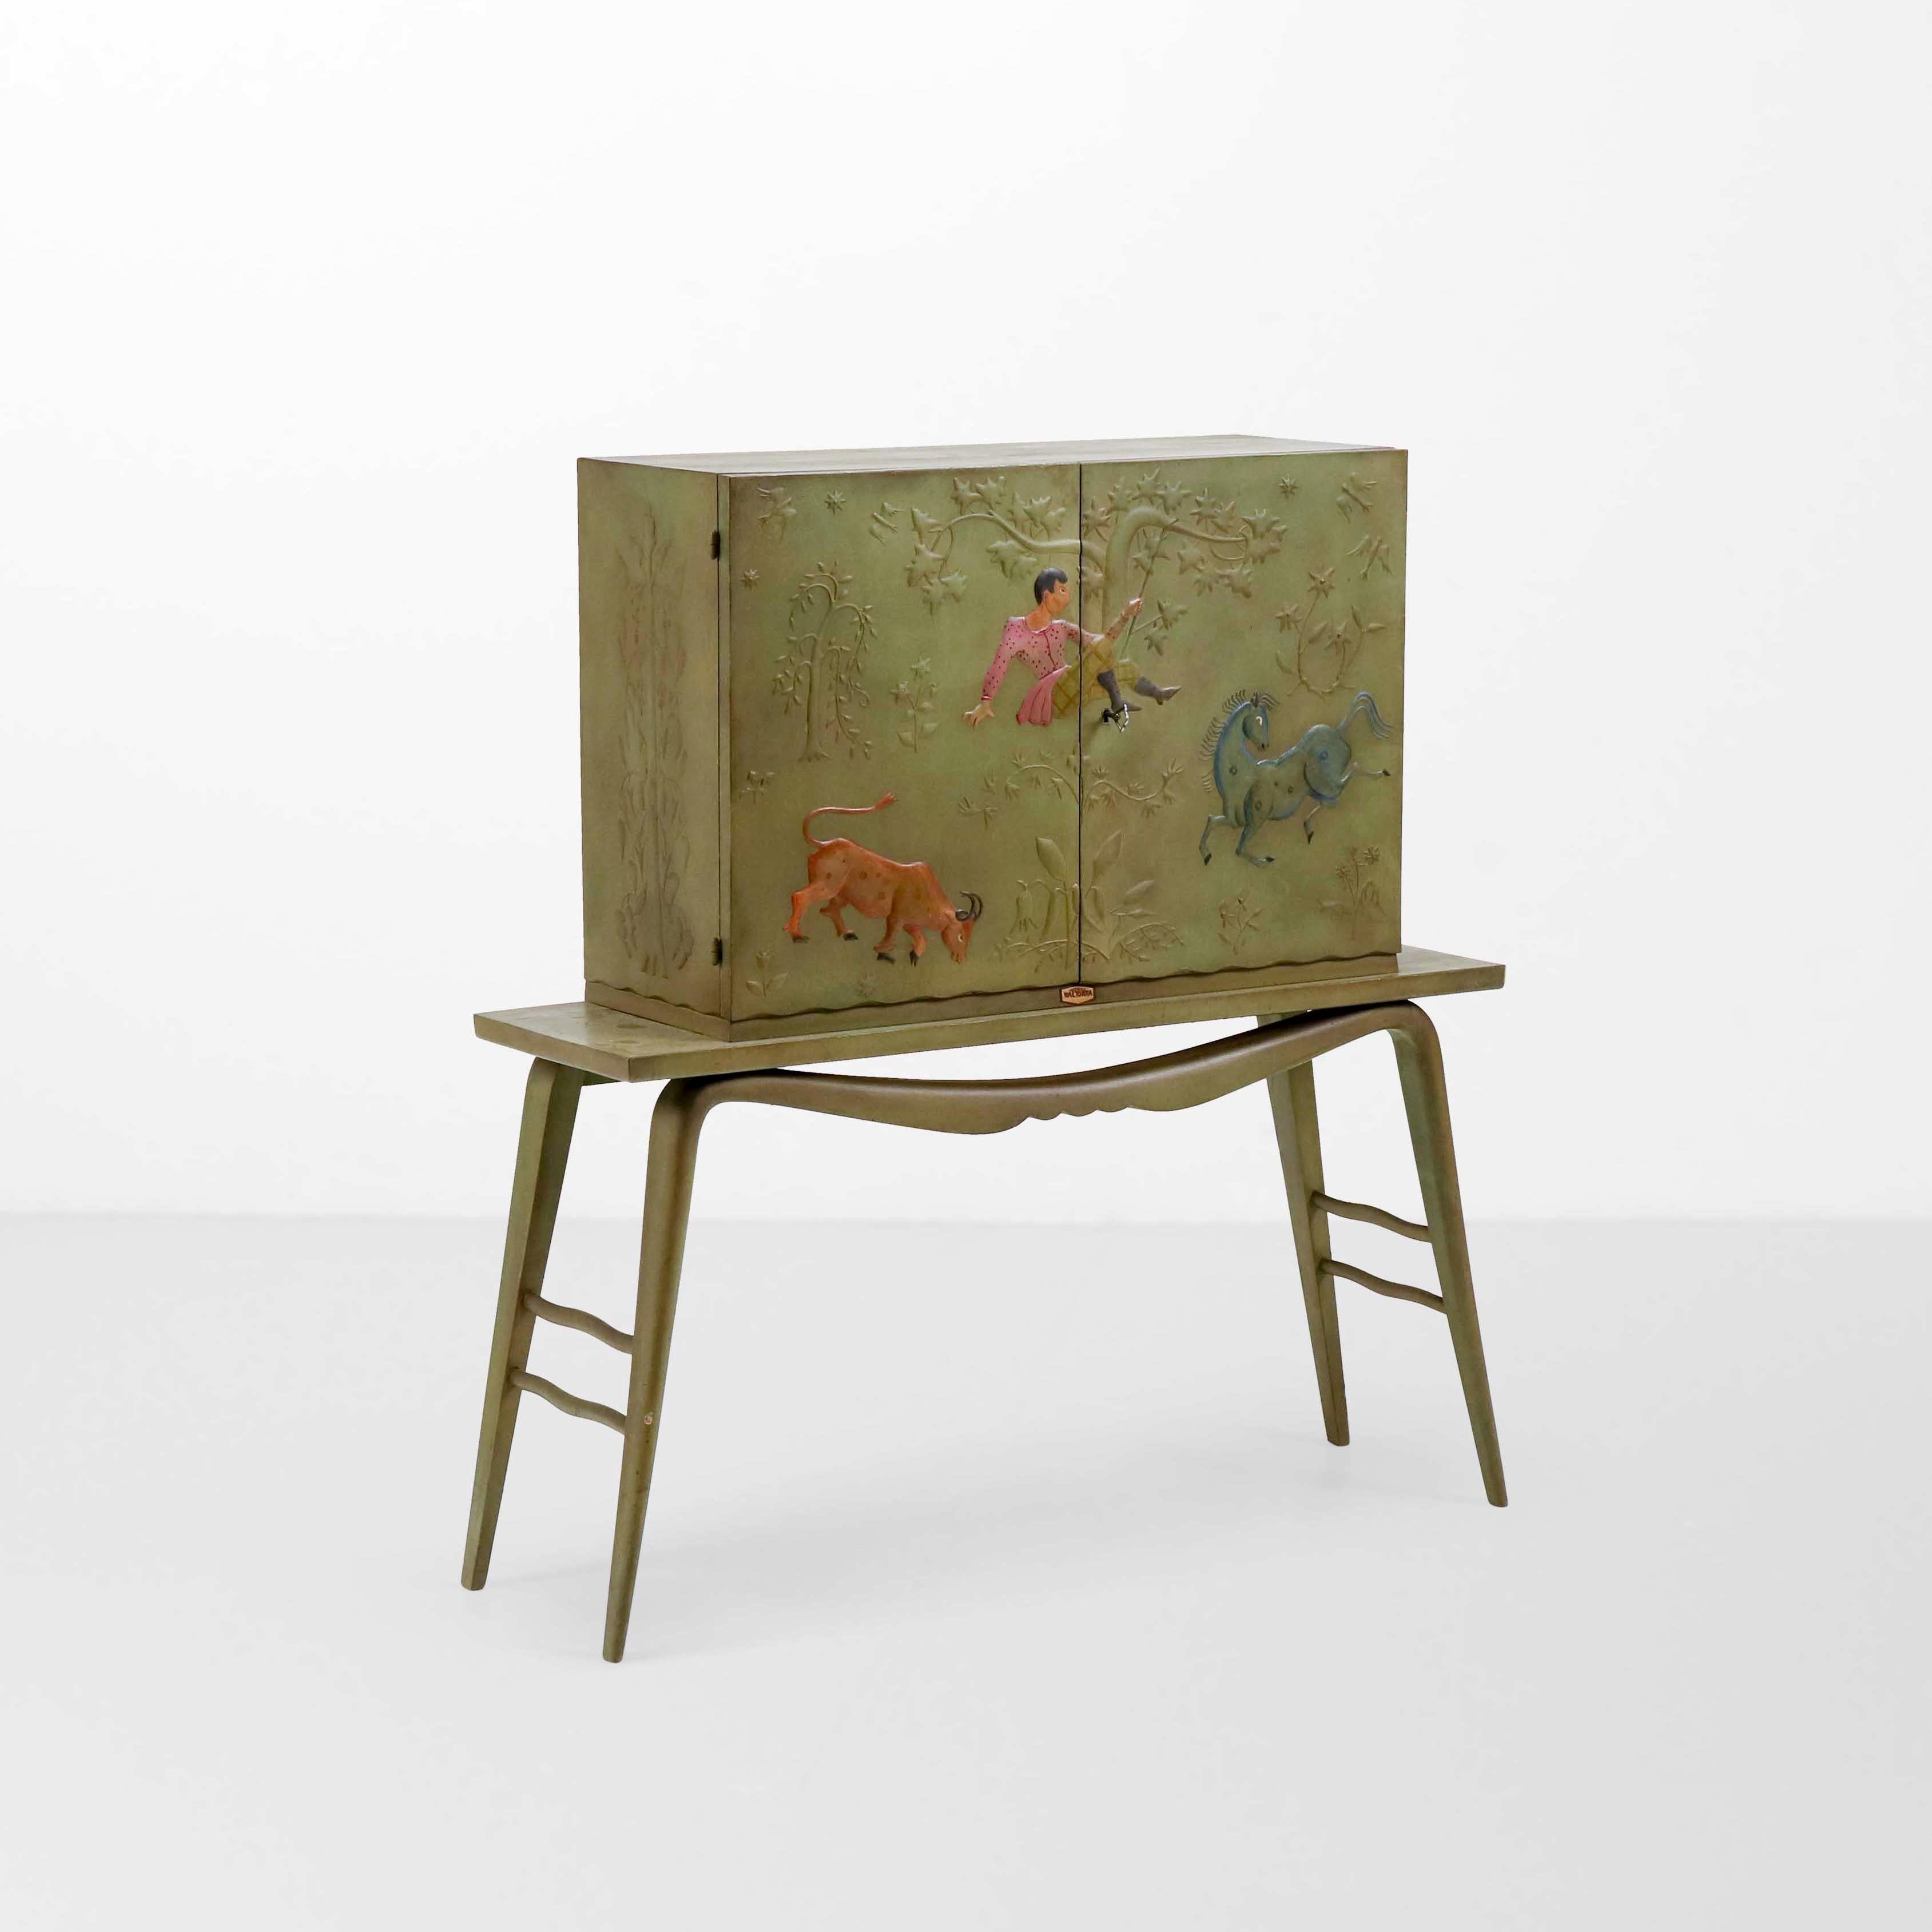 The Valtorta bar cabinet is a luxurious masterpiece, marrying functionality with artistic flair. Inside, a mirrored interior adds glamour, while outside, adorned with bucolic illustrations, it becomes a visual delight. This piece created by Valtorta